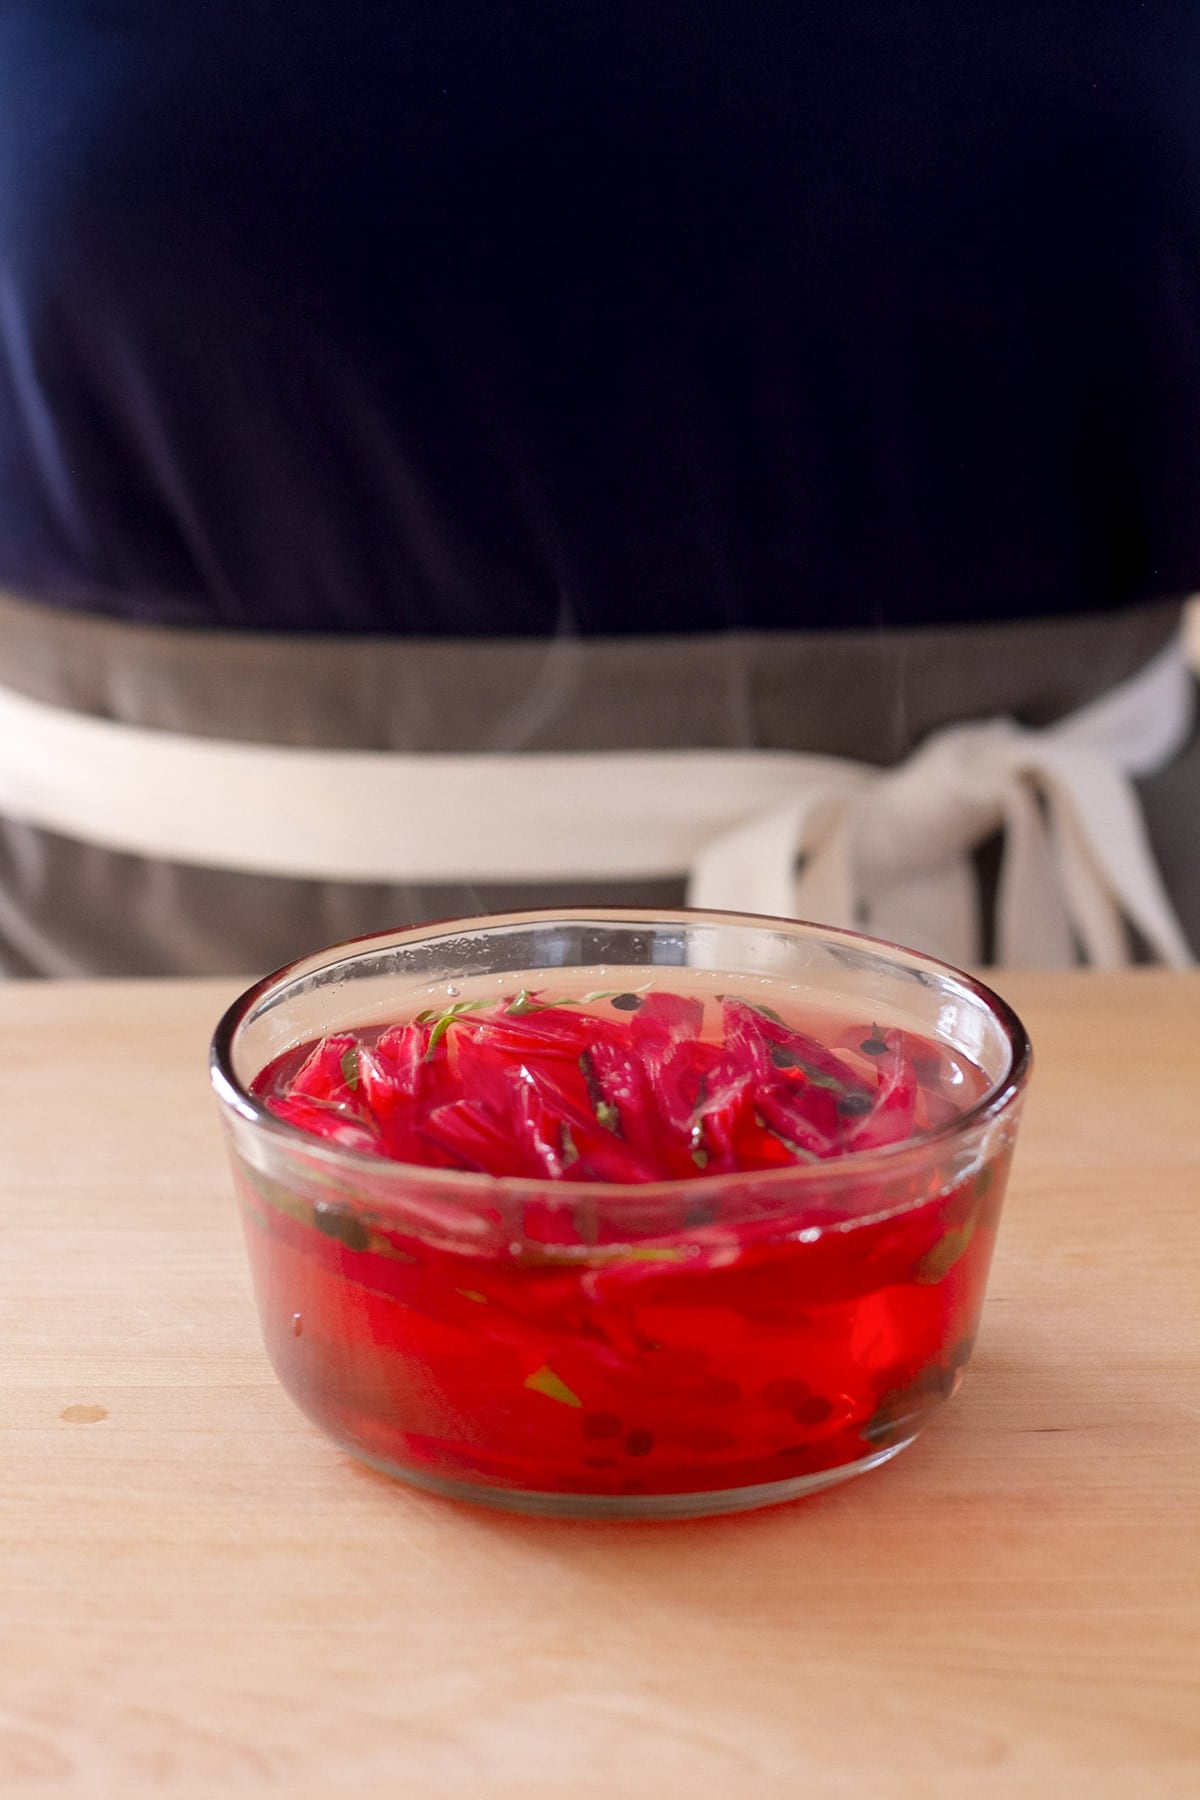 Quick pickled red swiss chard stems in a small glass pyrex container submerged in steaming hot pickling liquid.